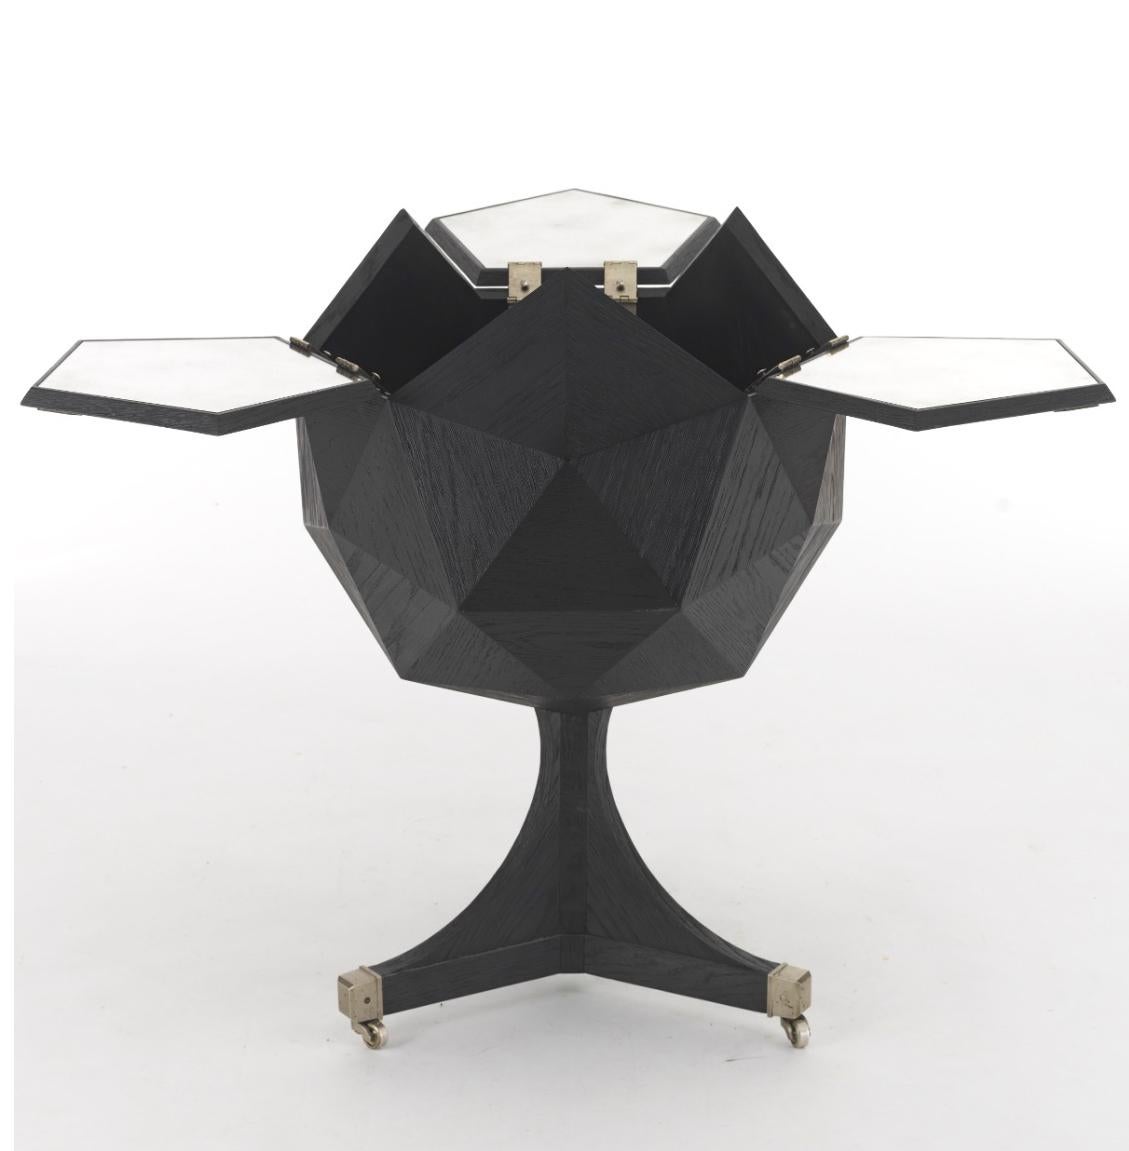 Polyhedron bar cart in the style of Ico Parisi was originally marketed by Restoration Hardware. Beautifully grained oak is wire brushed, to reveal the grain pattern, then lacquered in matte black. The three top panels open, via the nickeled brass